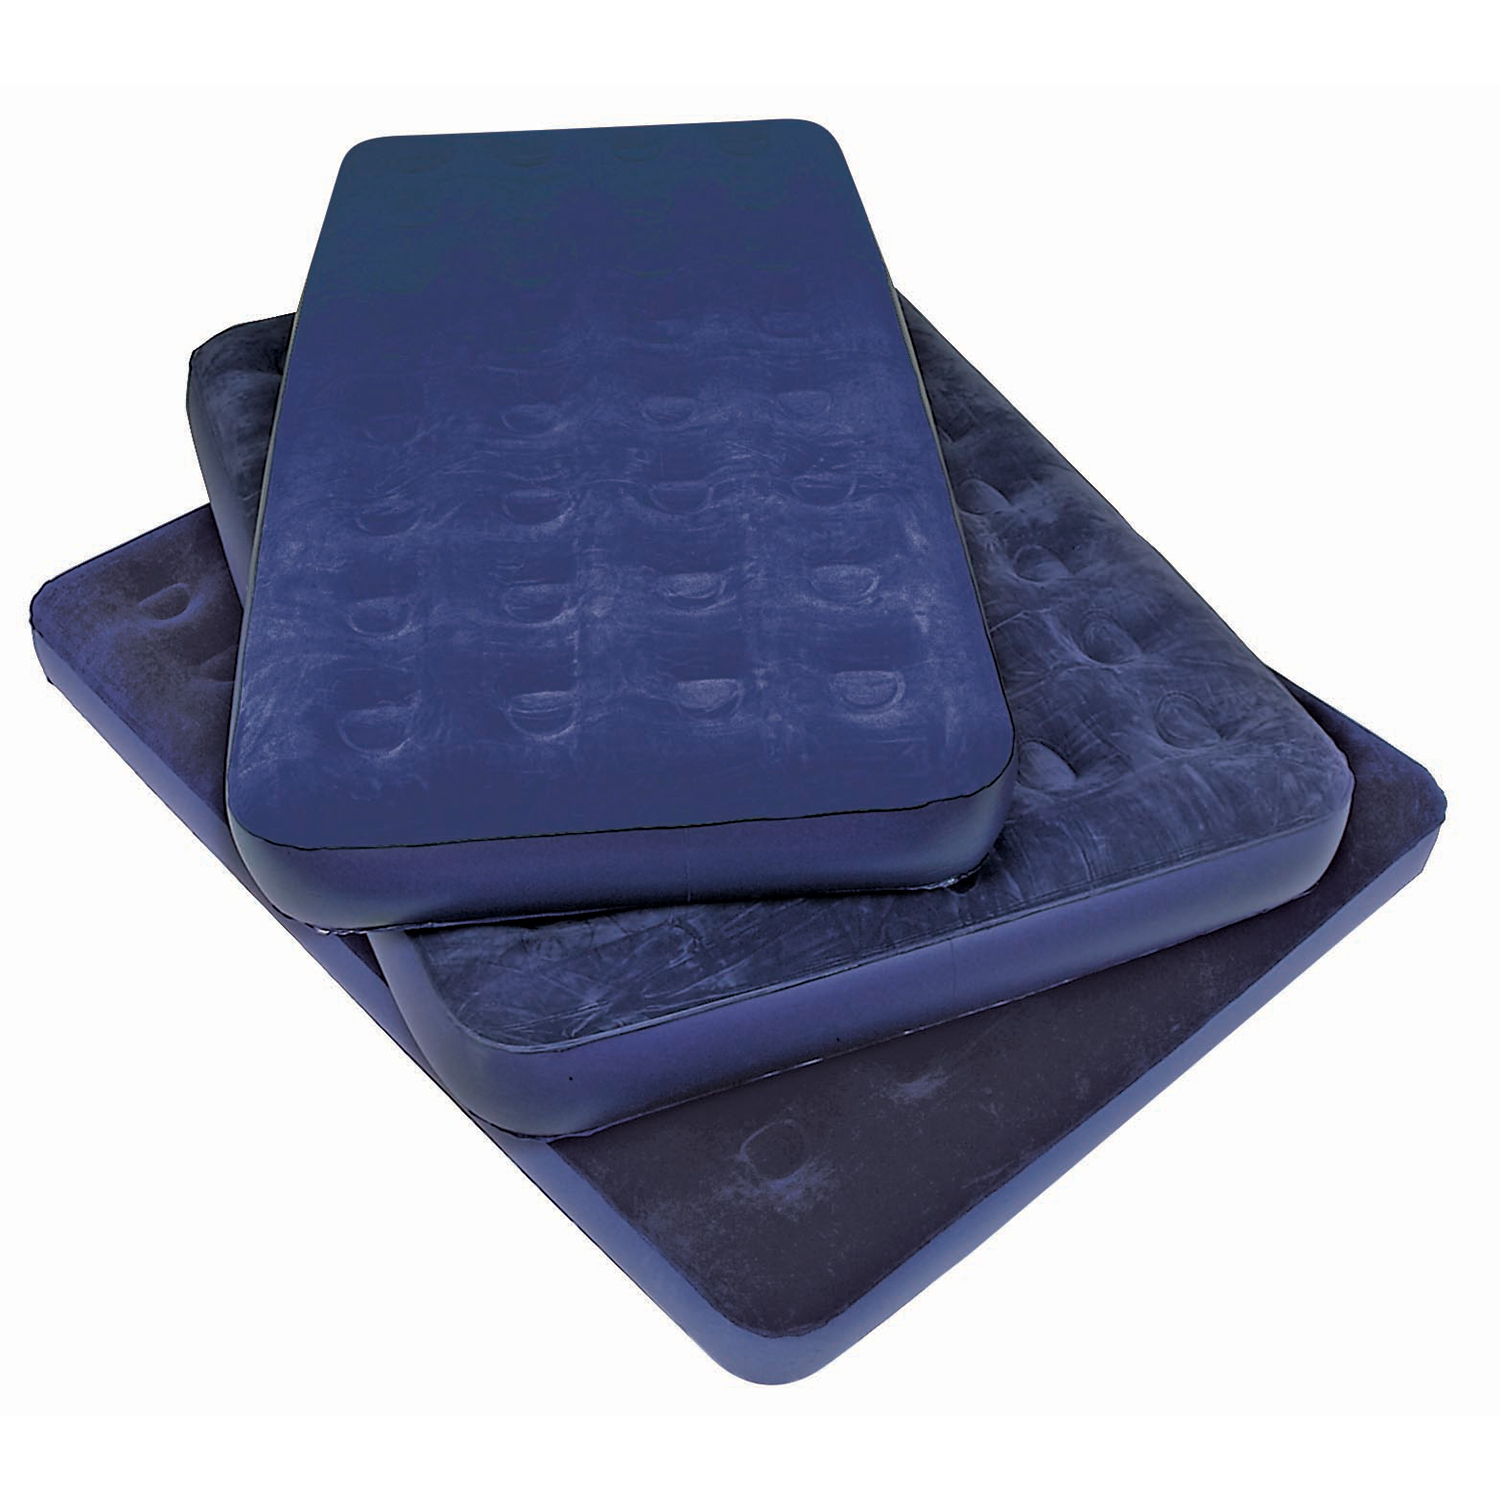 World Famous - Velour top air bed - Double